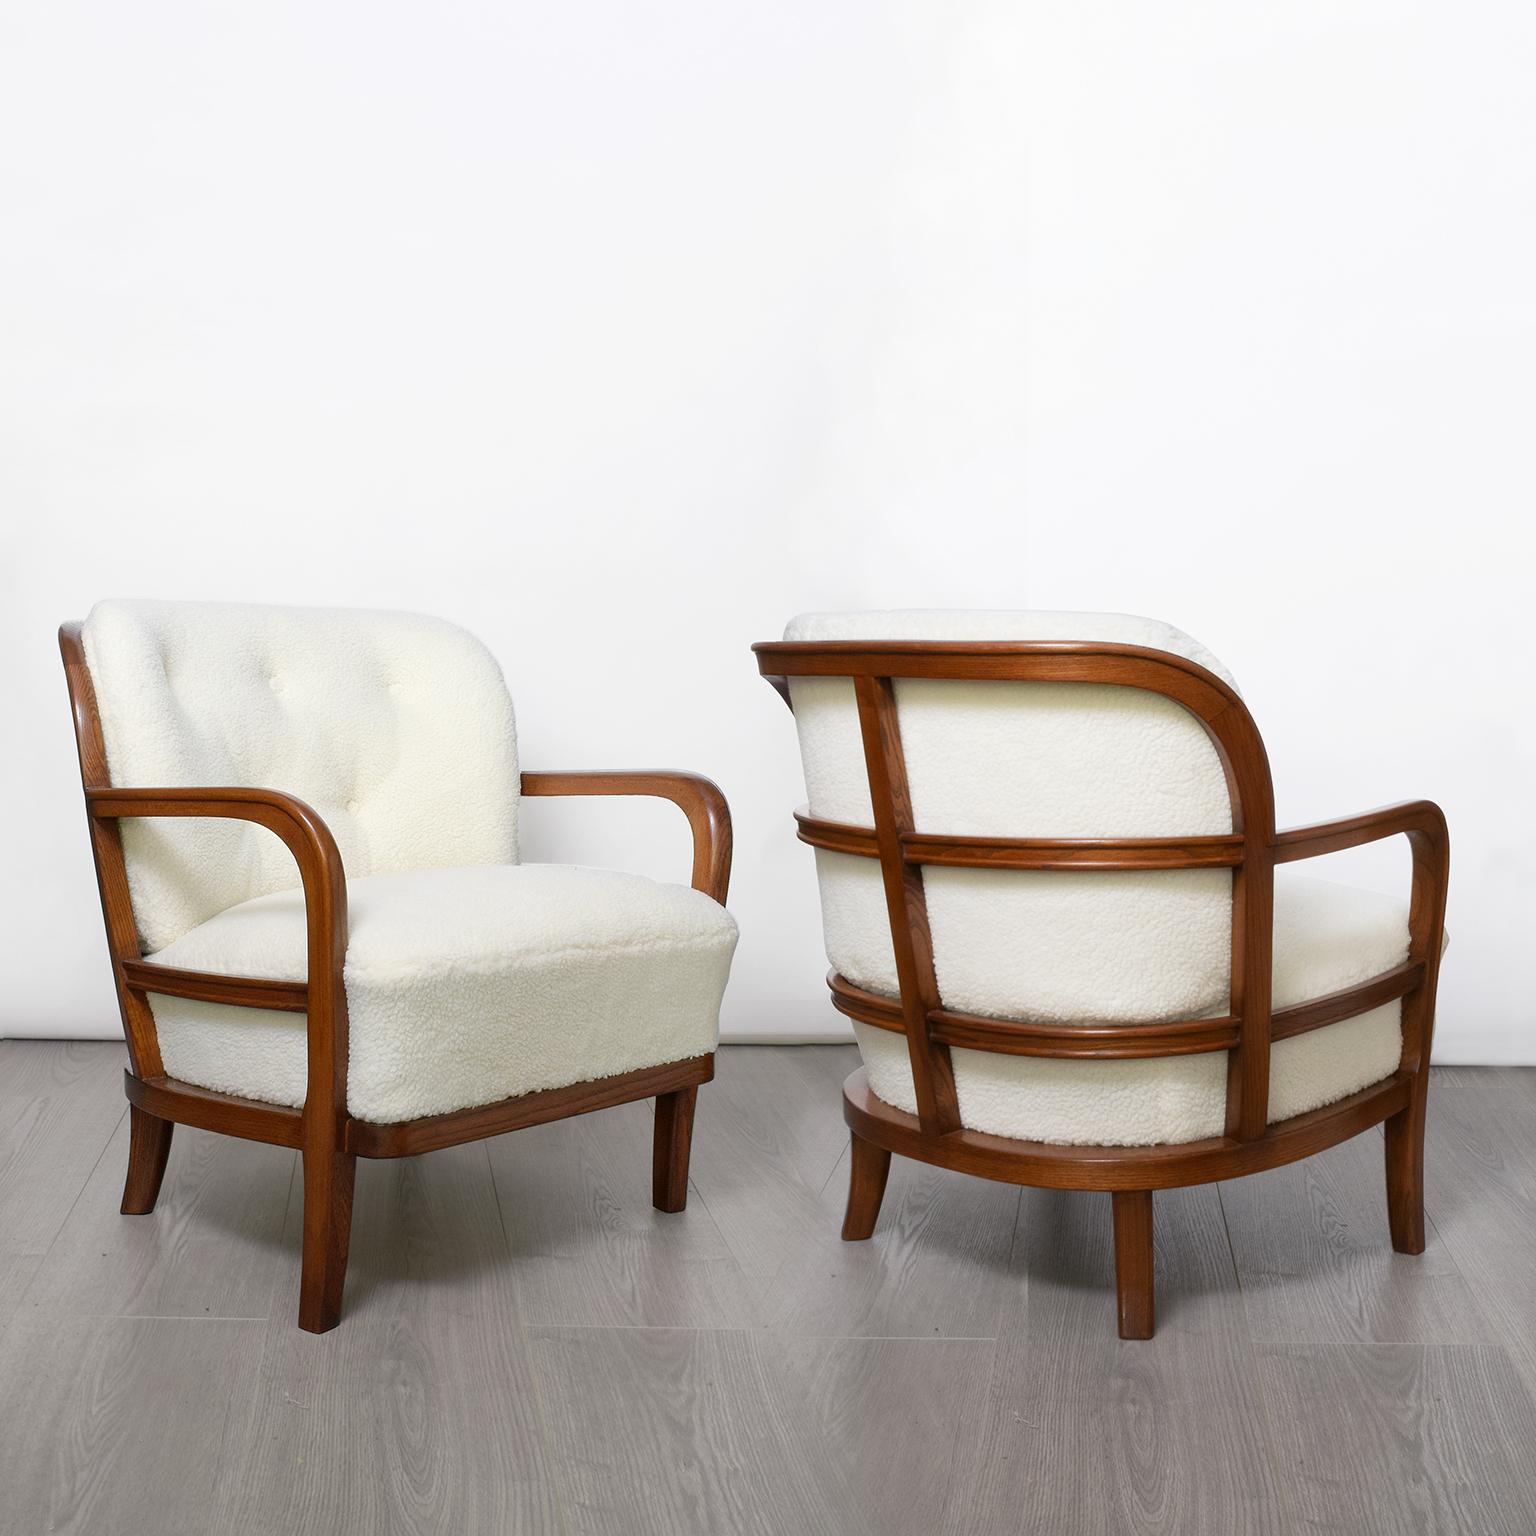 Pair of lounge chairs with “ribbed” frames in stained solid elm wood. Upholstered in faux lambs skin fabric. Newly restored in excellent condition, designed by Carl-Johan Boman circa 1940s, made by OY Boman, Finland.

Measures: Height 29“, width